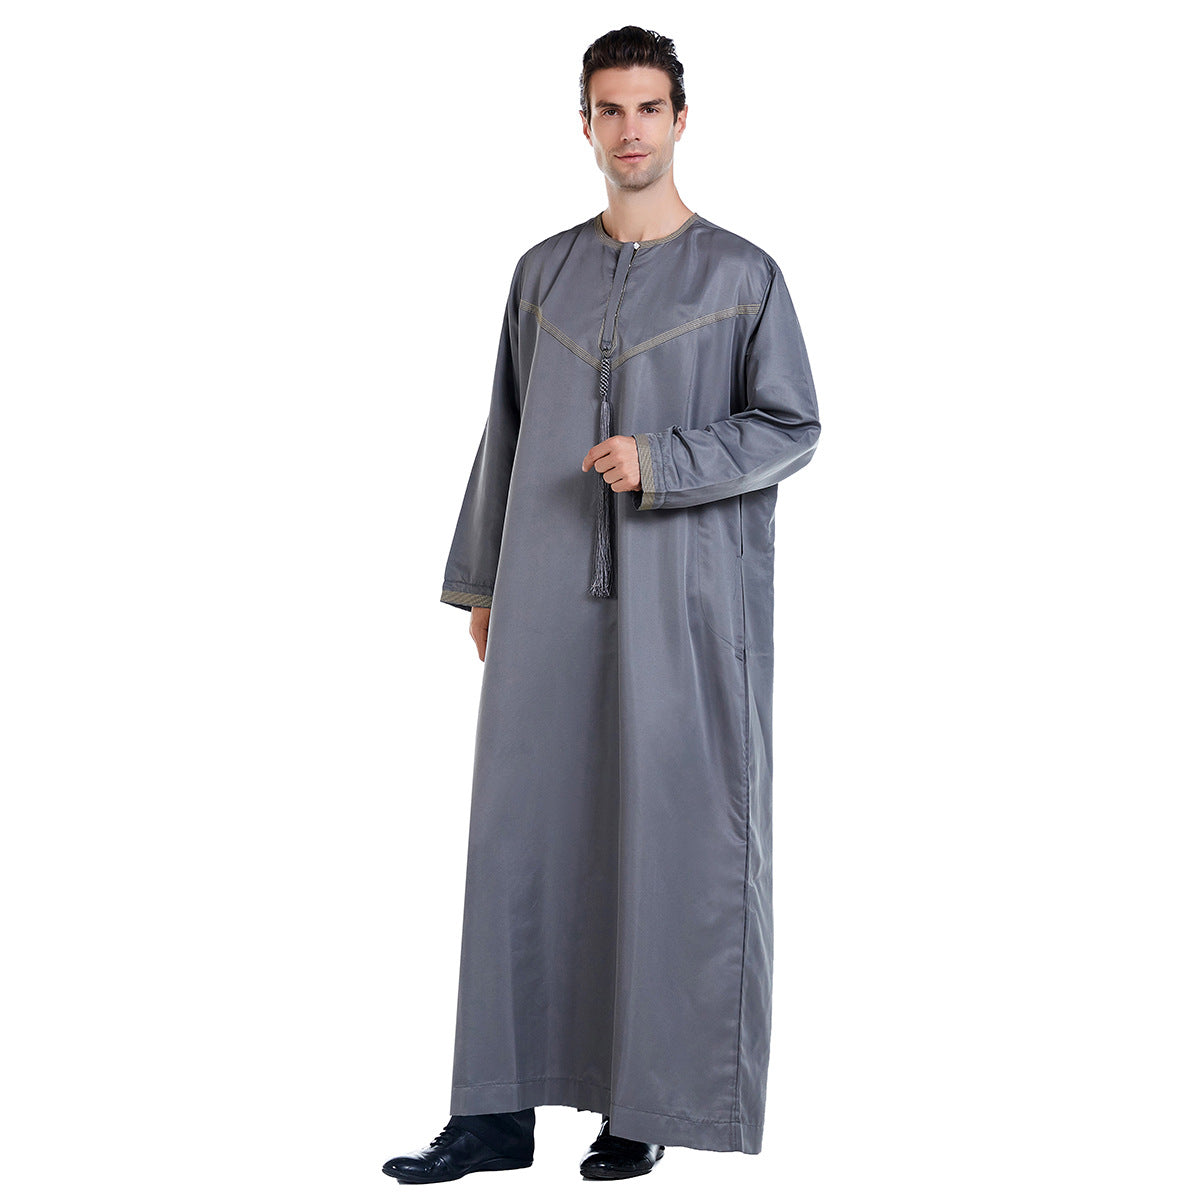 Introducing the Emirati Men's Thobe in Grey, a captivating and versatile garment that effortlessly combines traditional Islamic elegance with Modest Clothing style. This meticulously crafted thobe is designed to enhance your appearance and offer unrivaled comfort, making it a perfect choice for any occasion.